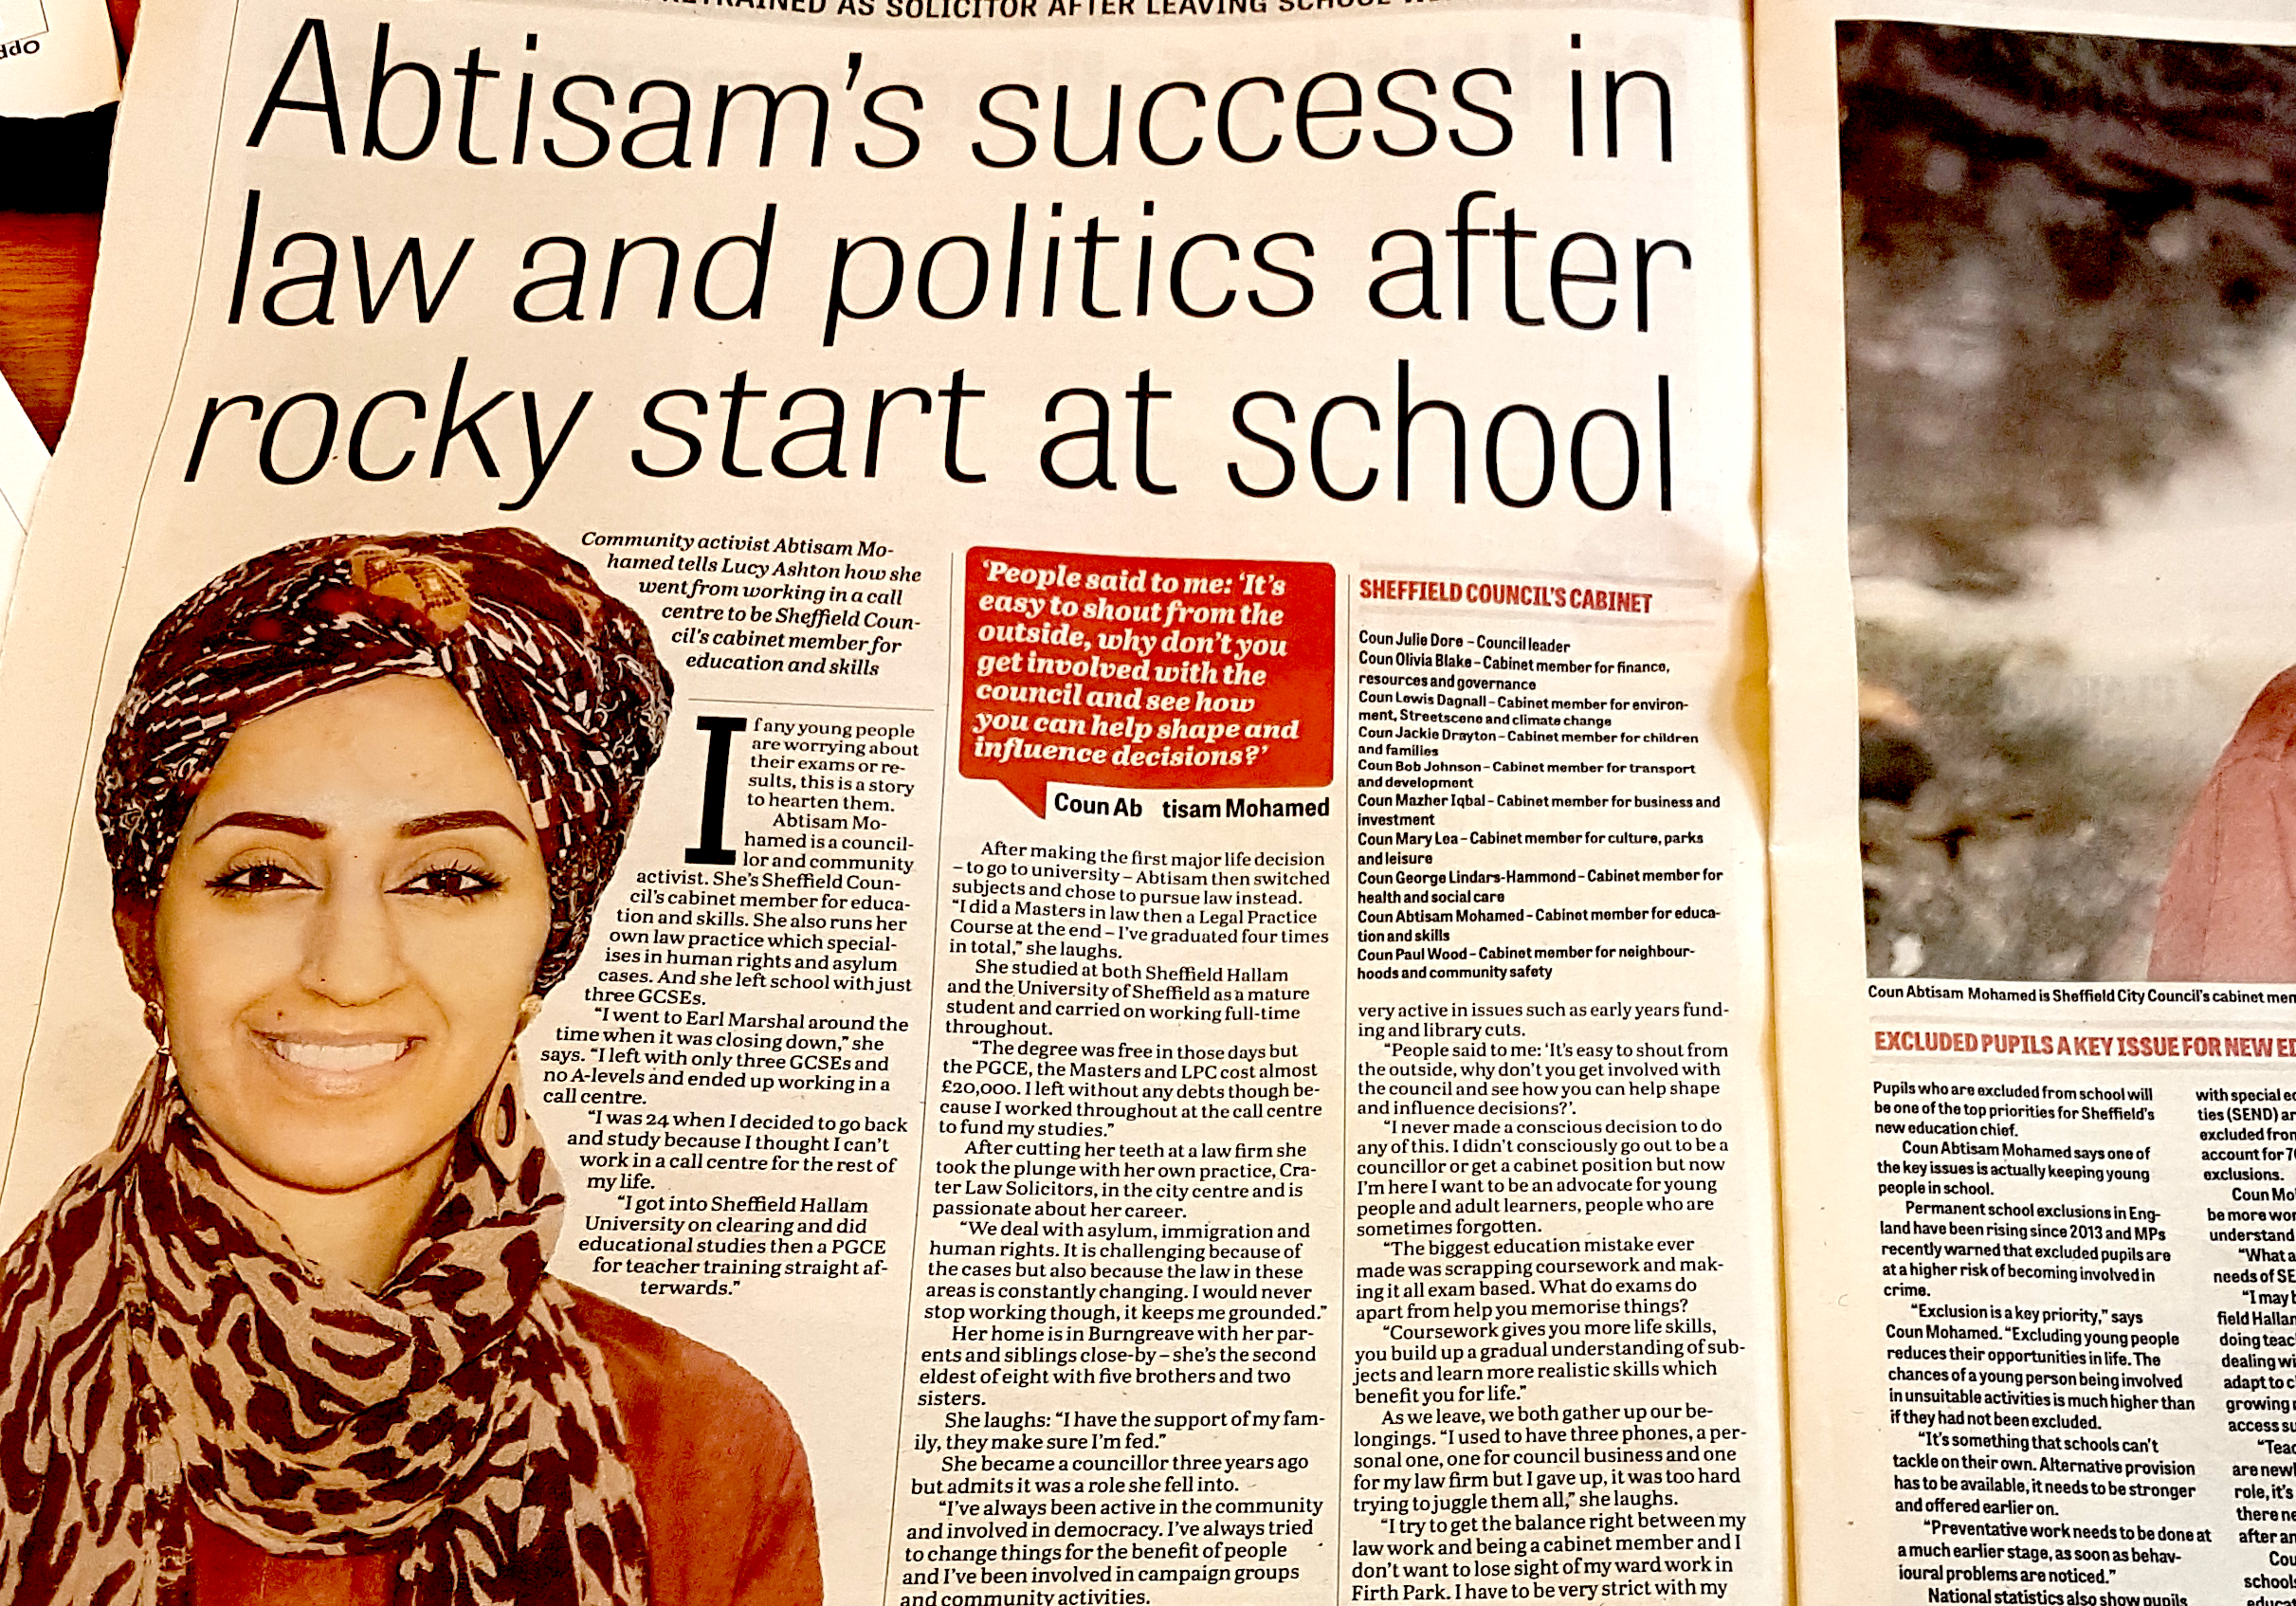 Abtisam's success in law and politics after rocky start